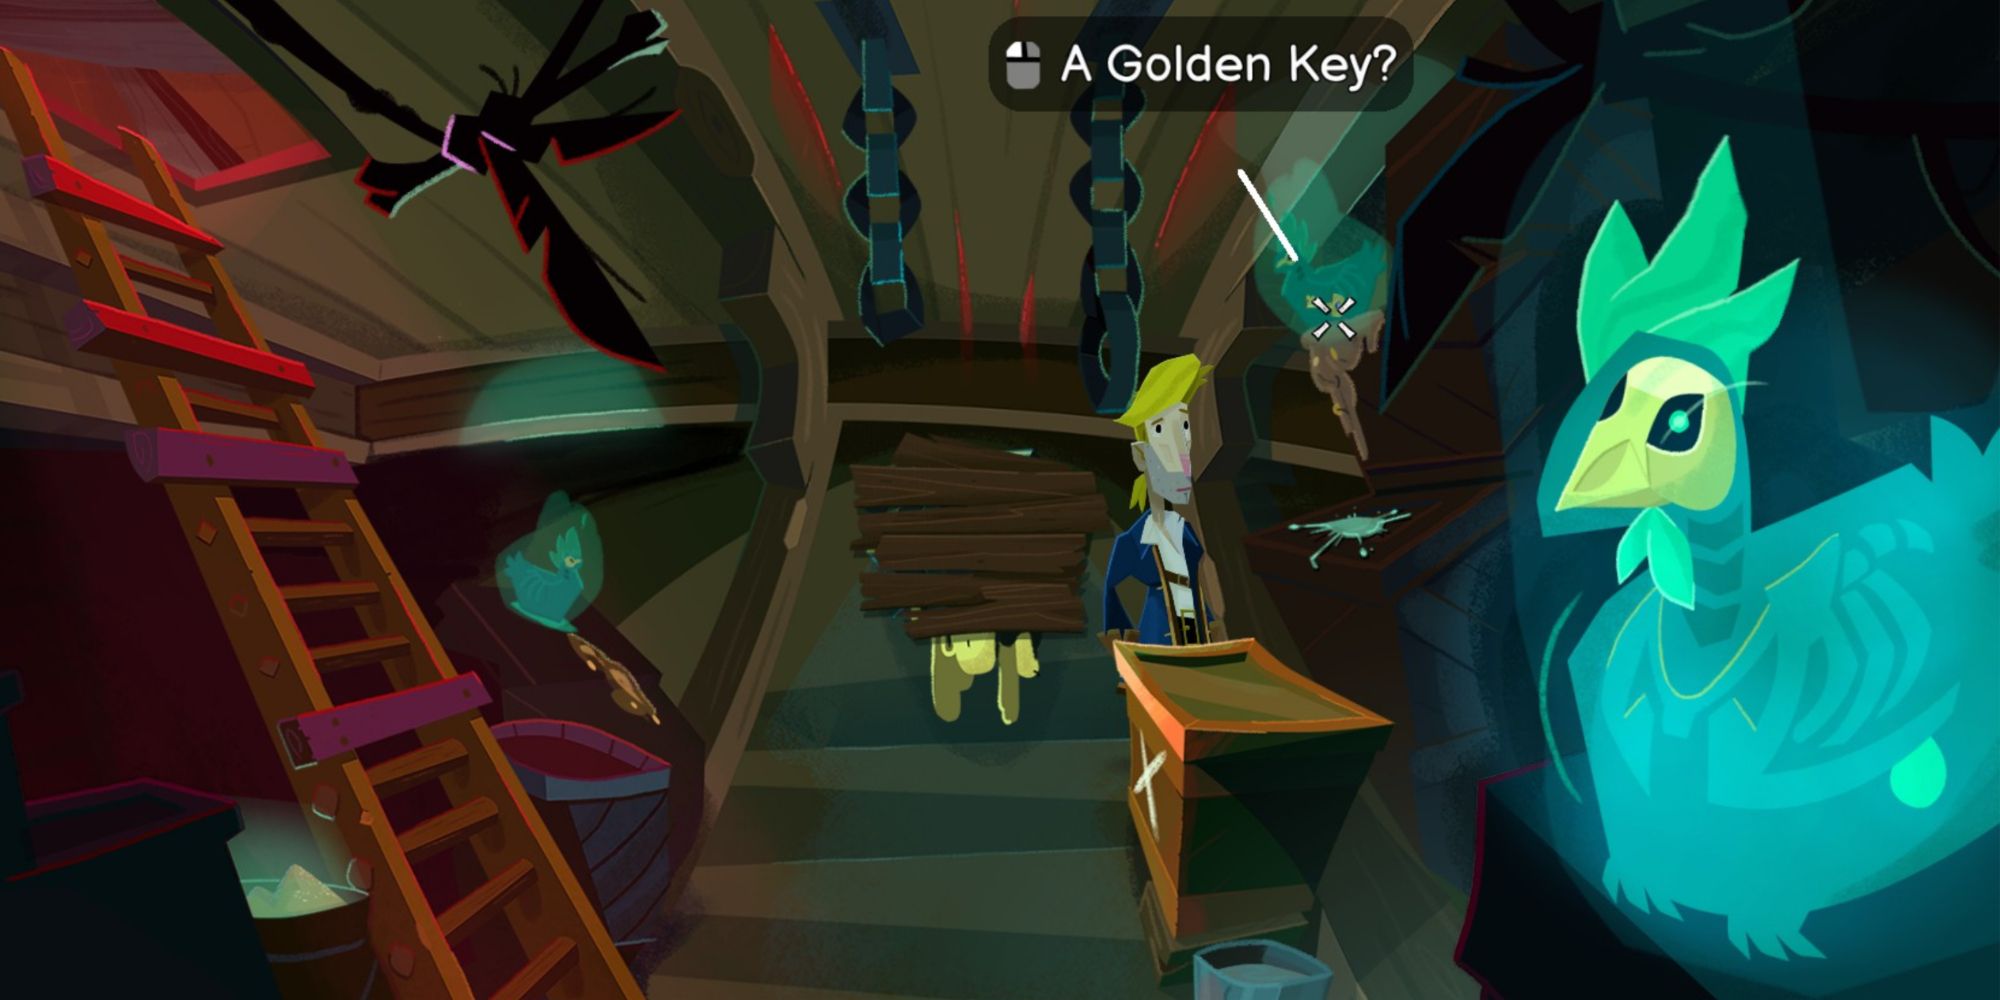 Return to Monkey Island Ghost Chicken with a Golden Key